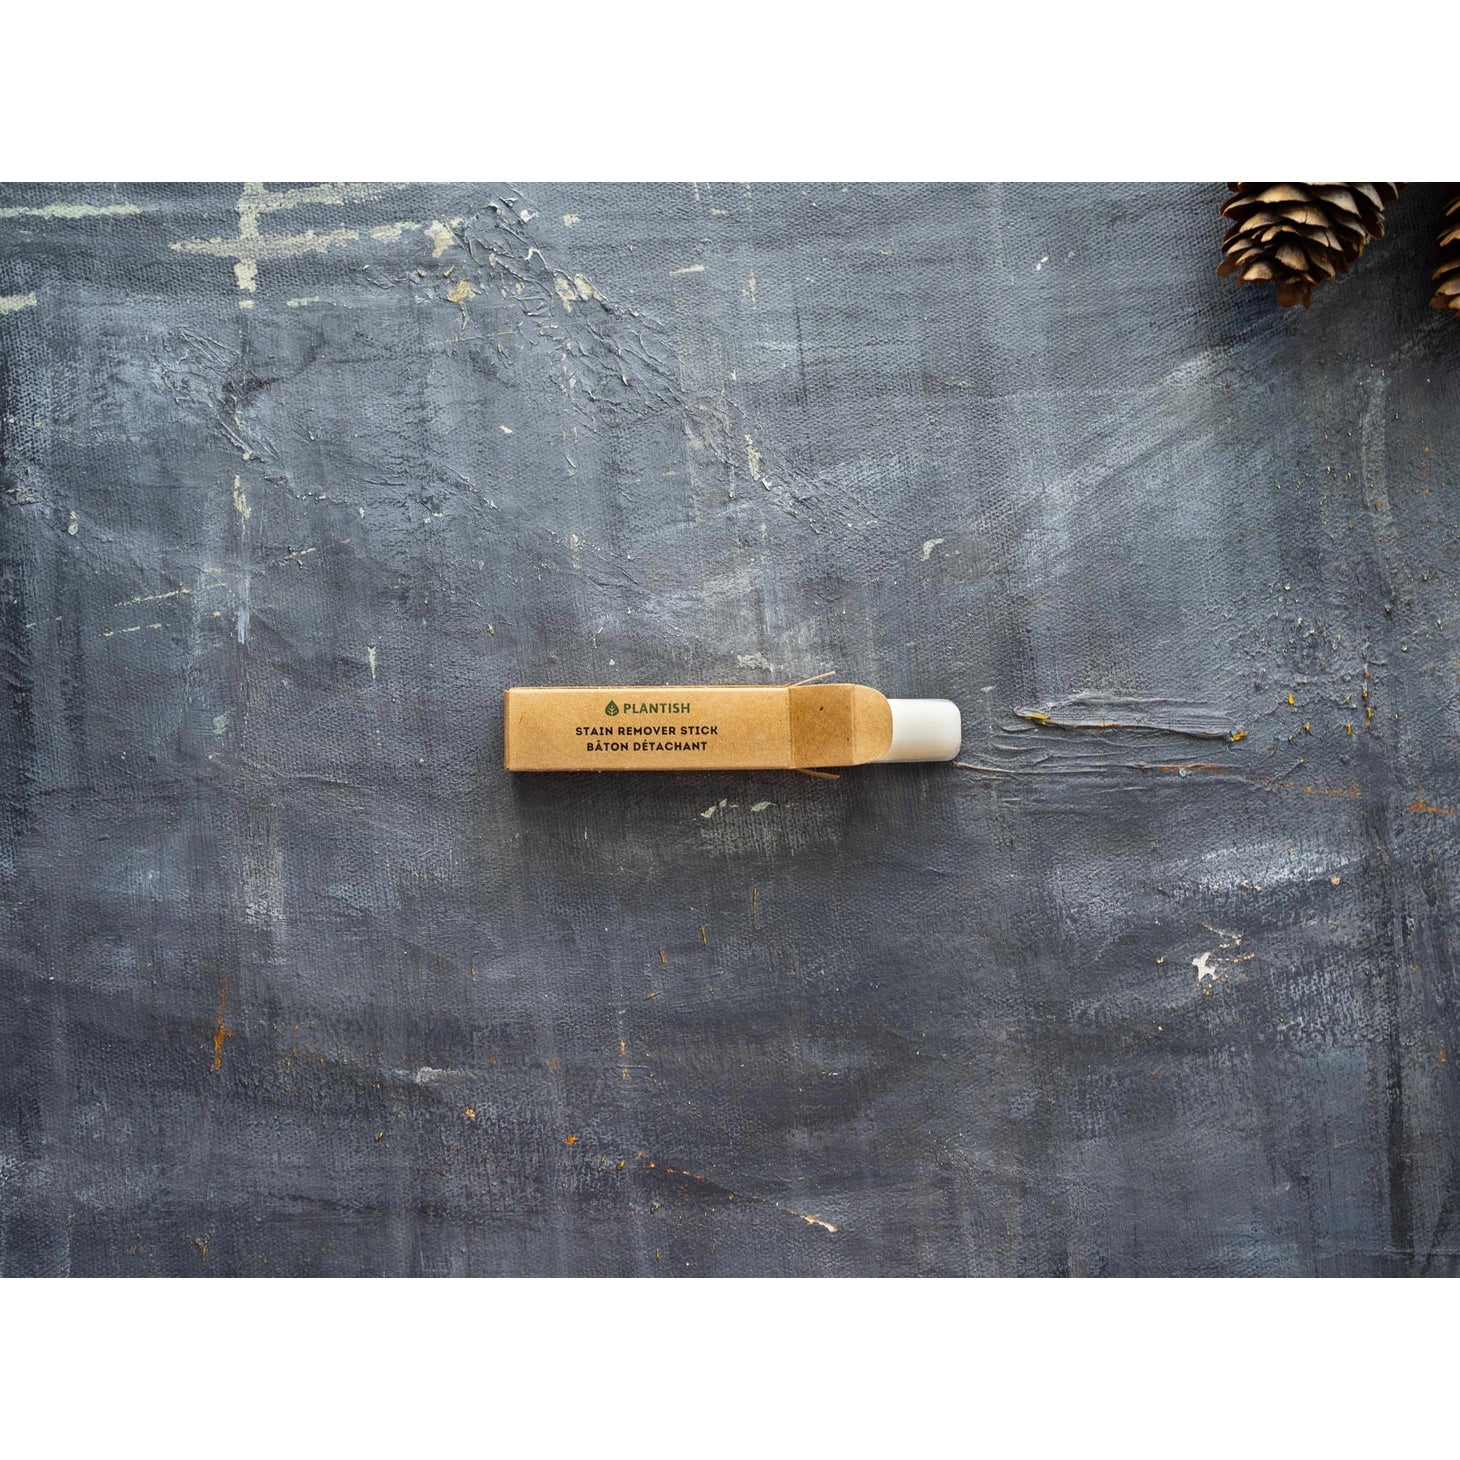 Plantish - Stain Remover Stick